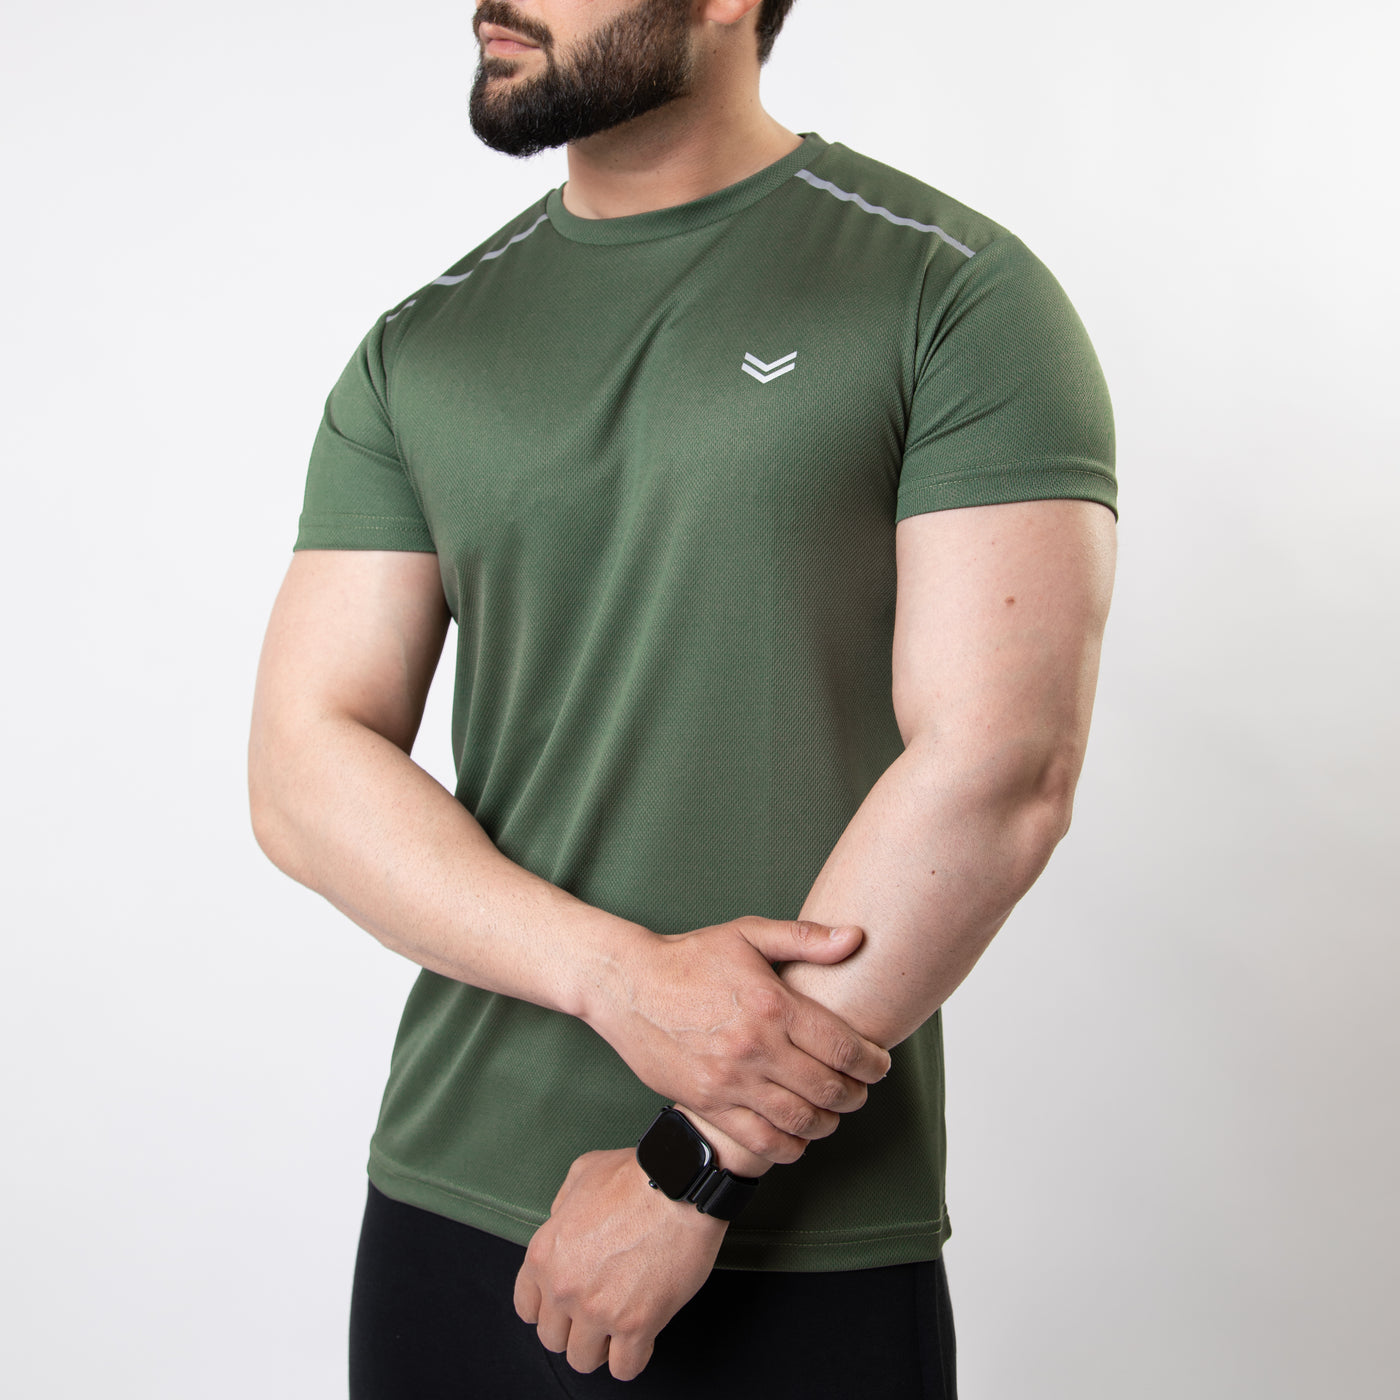 Olive Mesh Quick Dry T-Shirt with Shoulder Reflectors